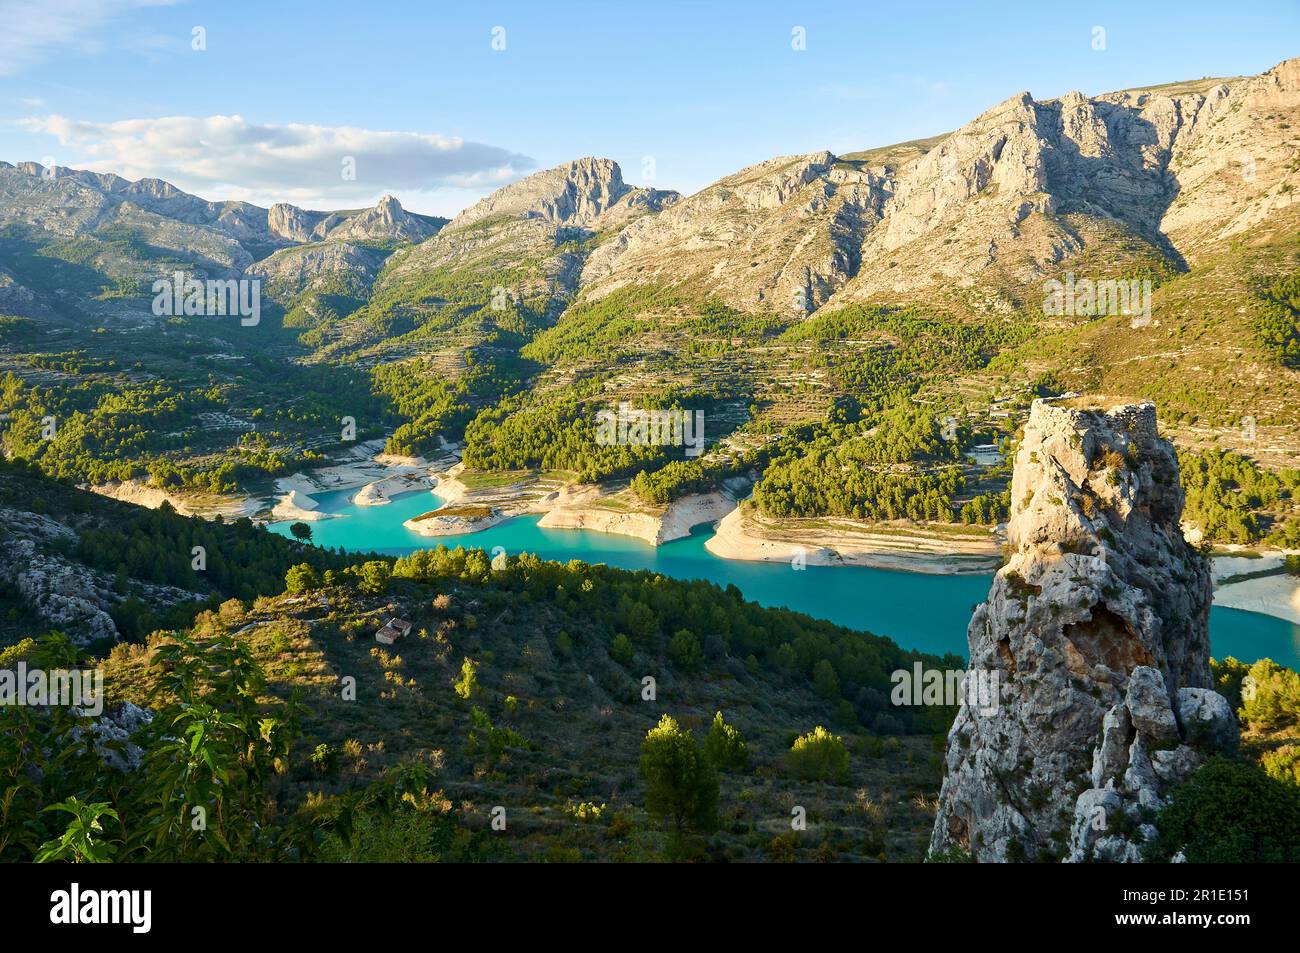 Guadalest reservoir at sundown with its characteristic turquoise waters (Castell de Guadalest, Marina Baixa, Alicante, Valencian Community, Spain) Stock Photo